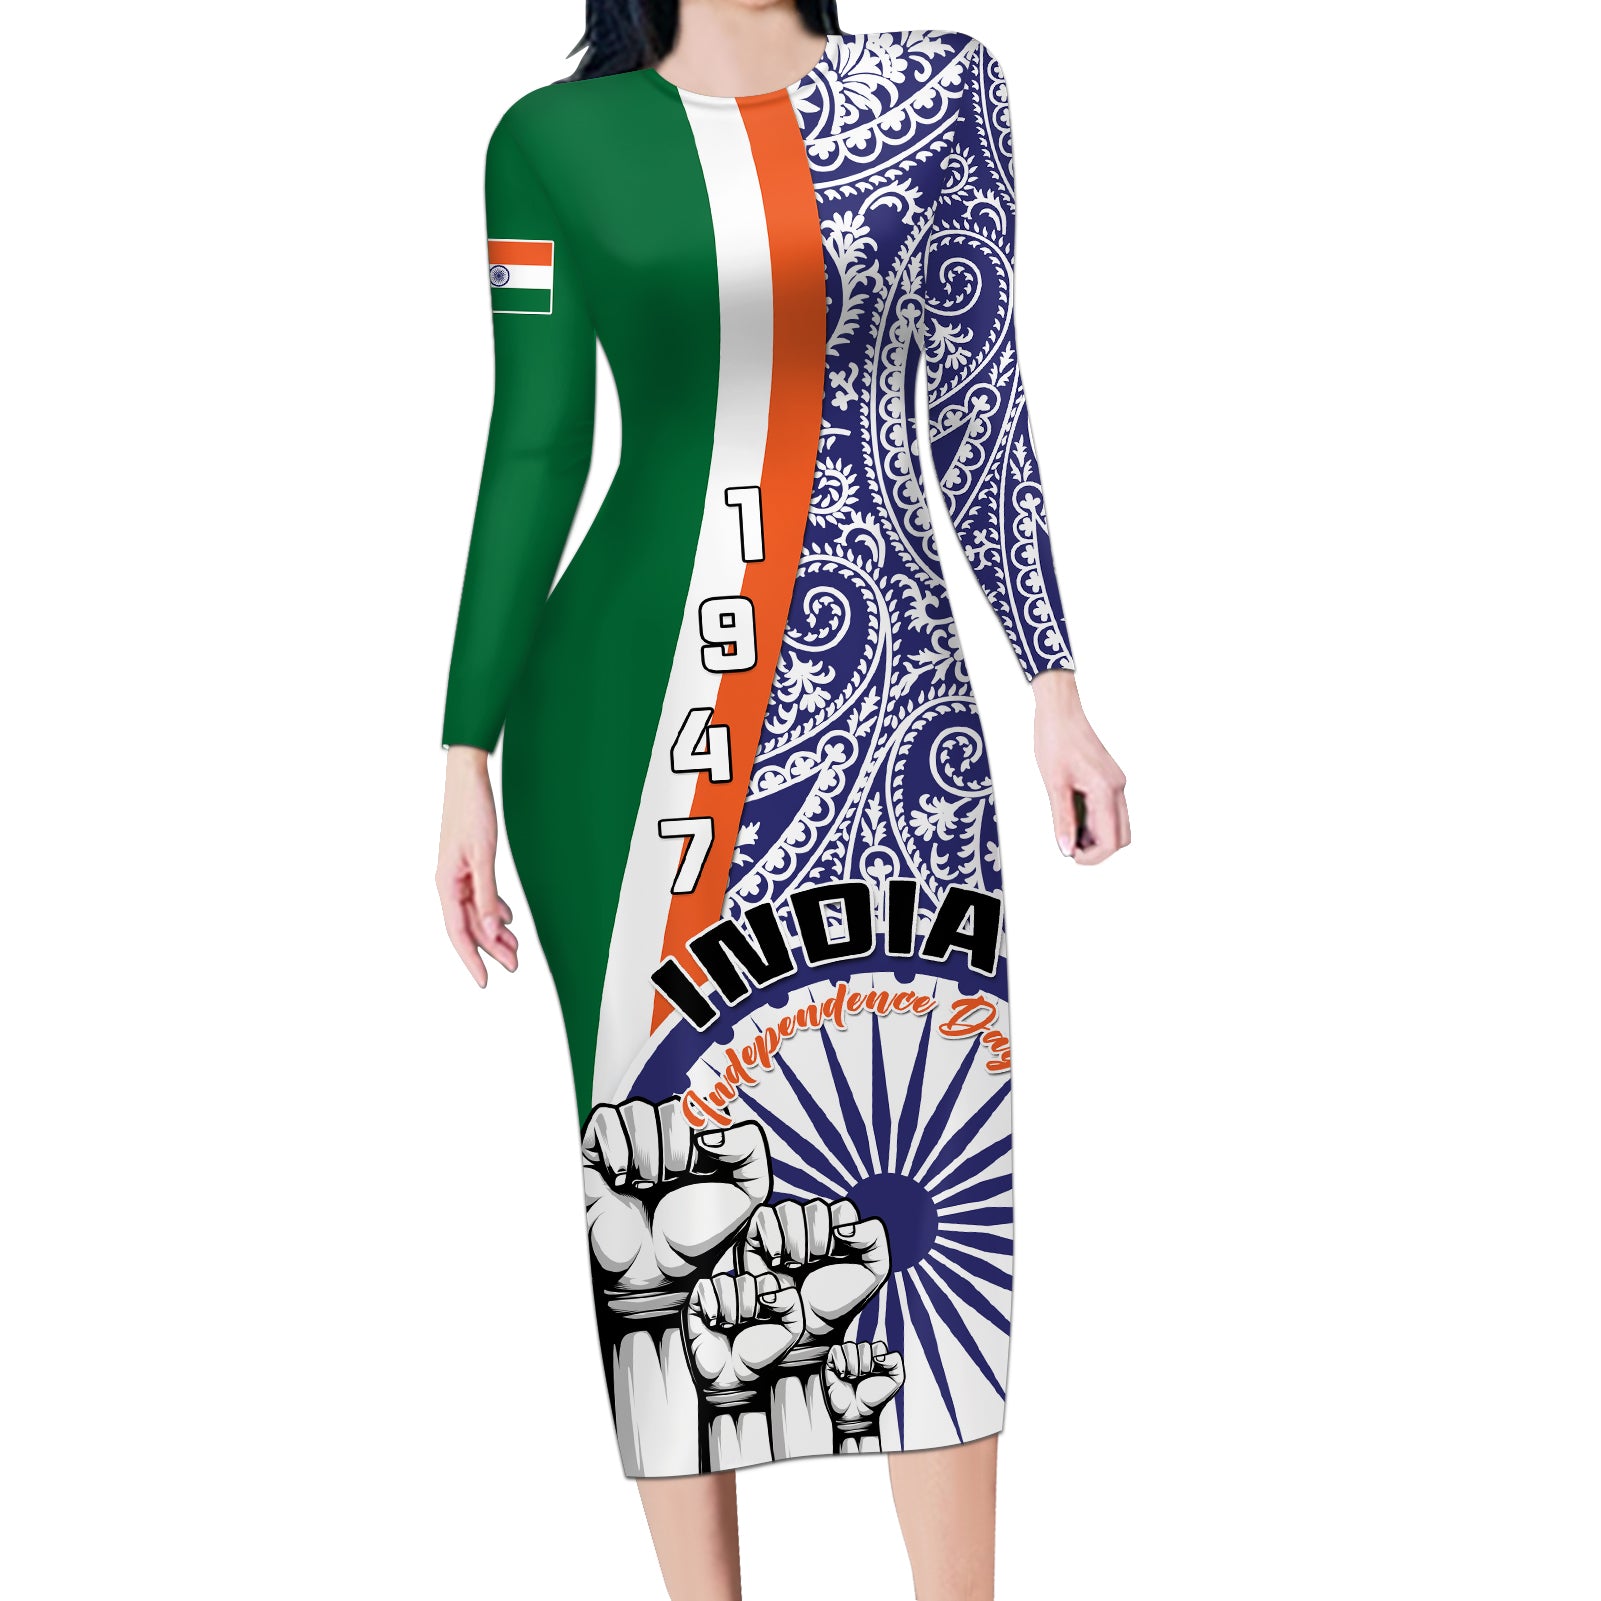 india-independence-day-long-sleeve-bodycon-dress-indian-paisley-pattern